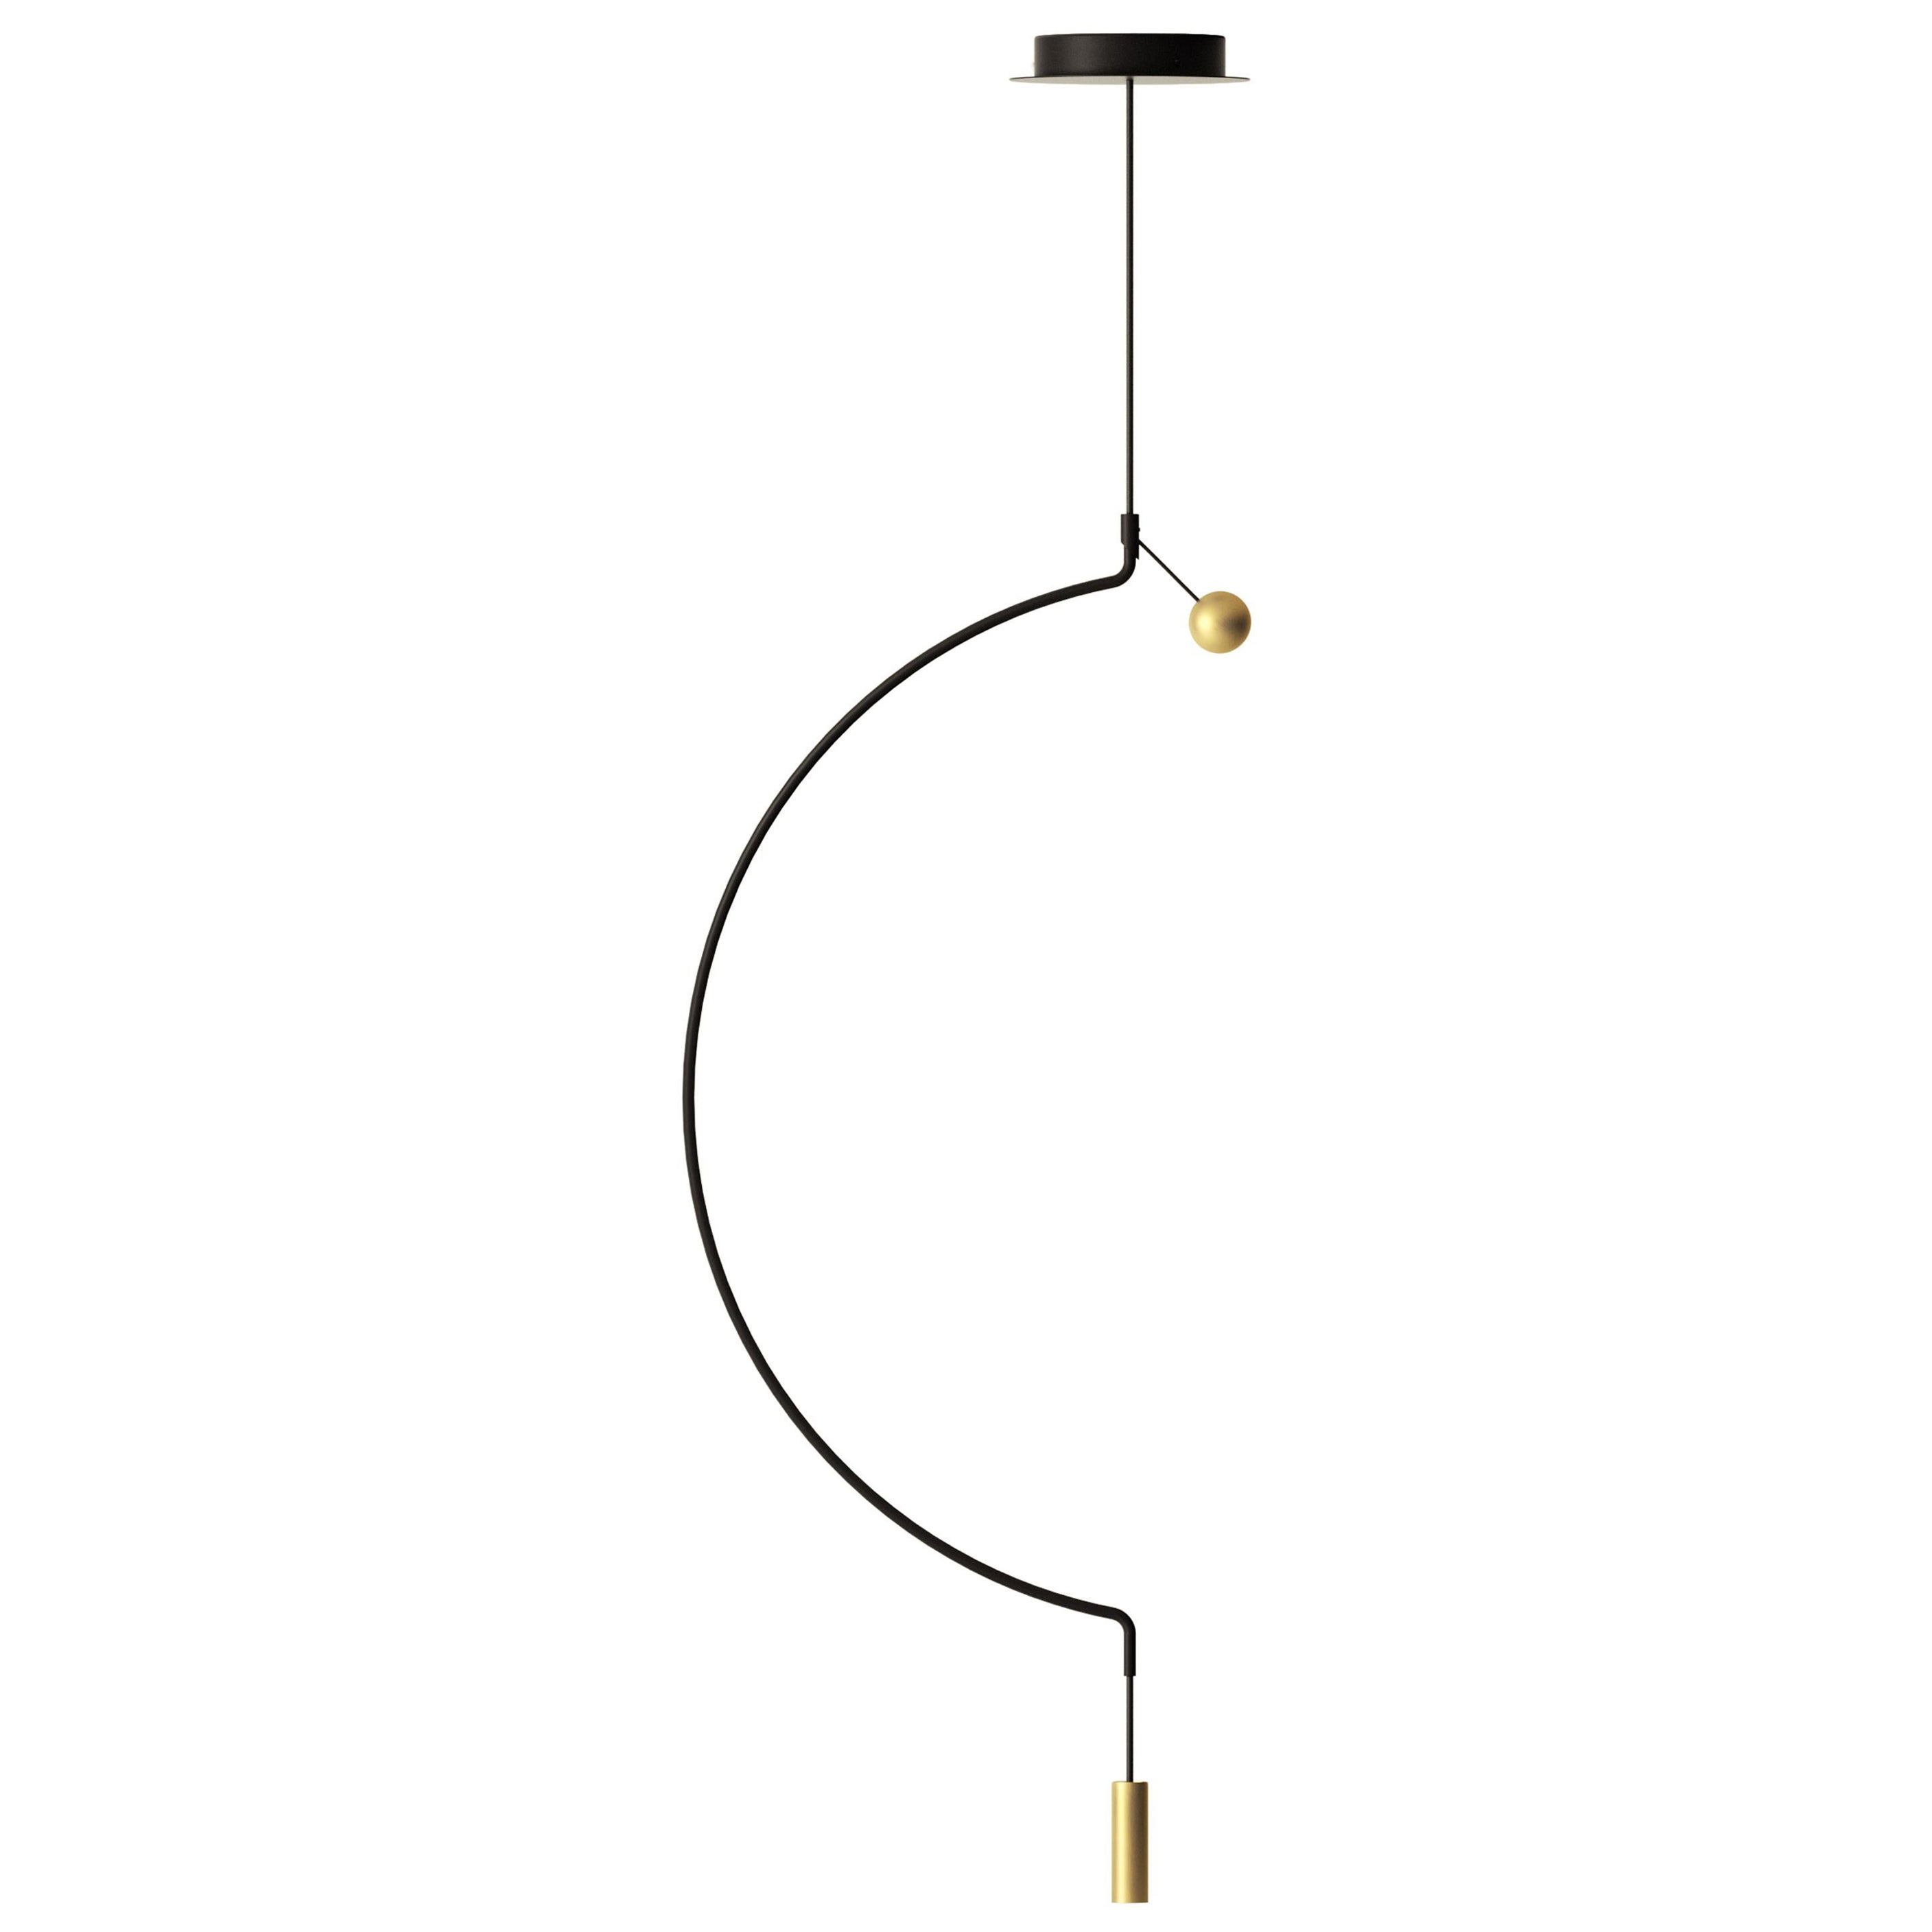 Axolight Liaison Model G1 Pendant Lamp in Black/Gold by Sara Moroni For Sale